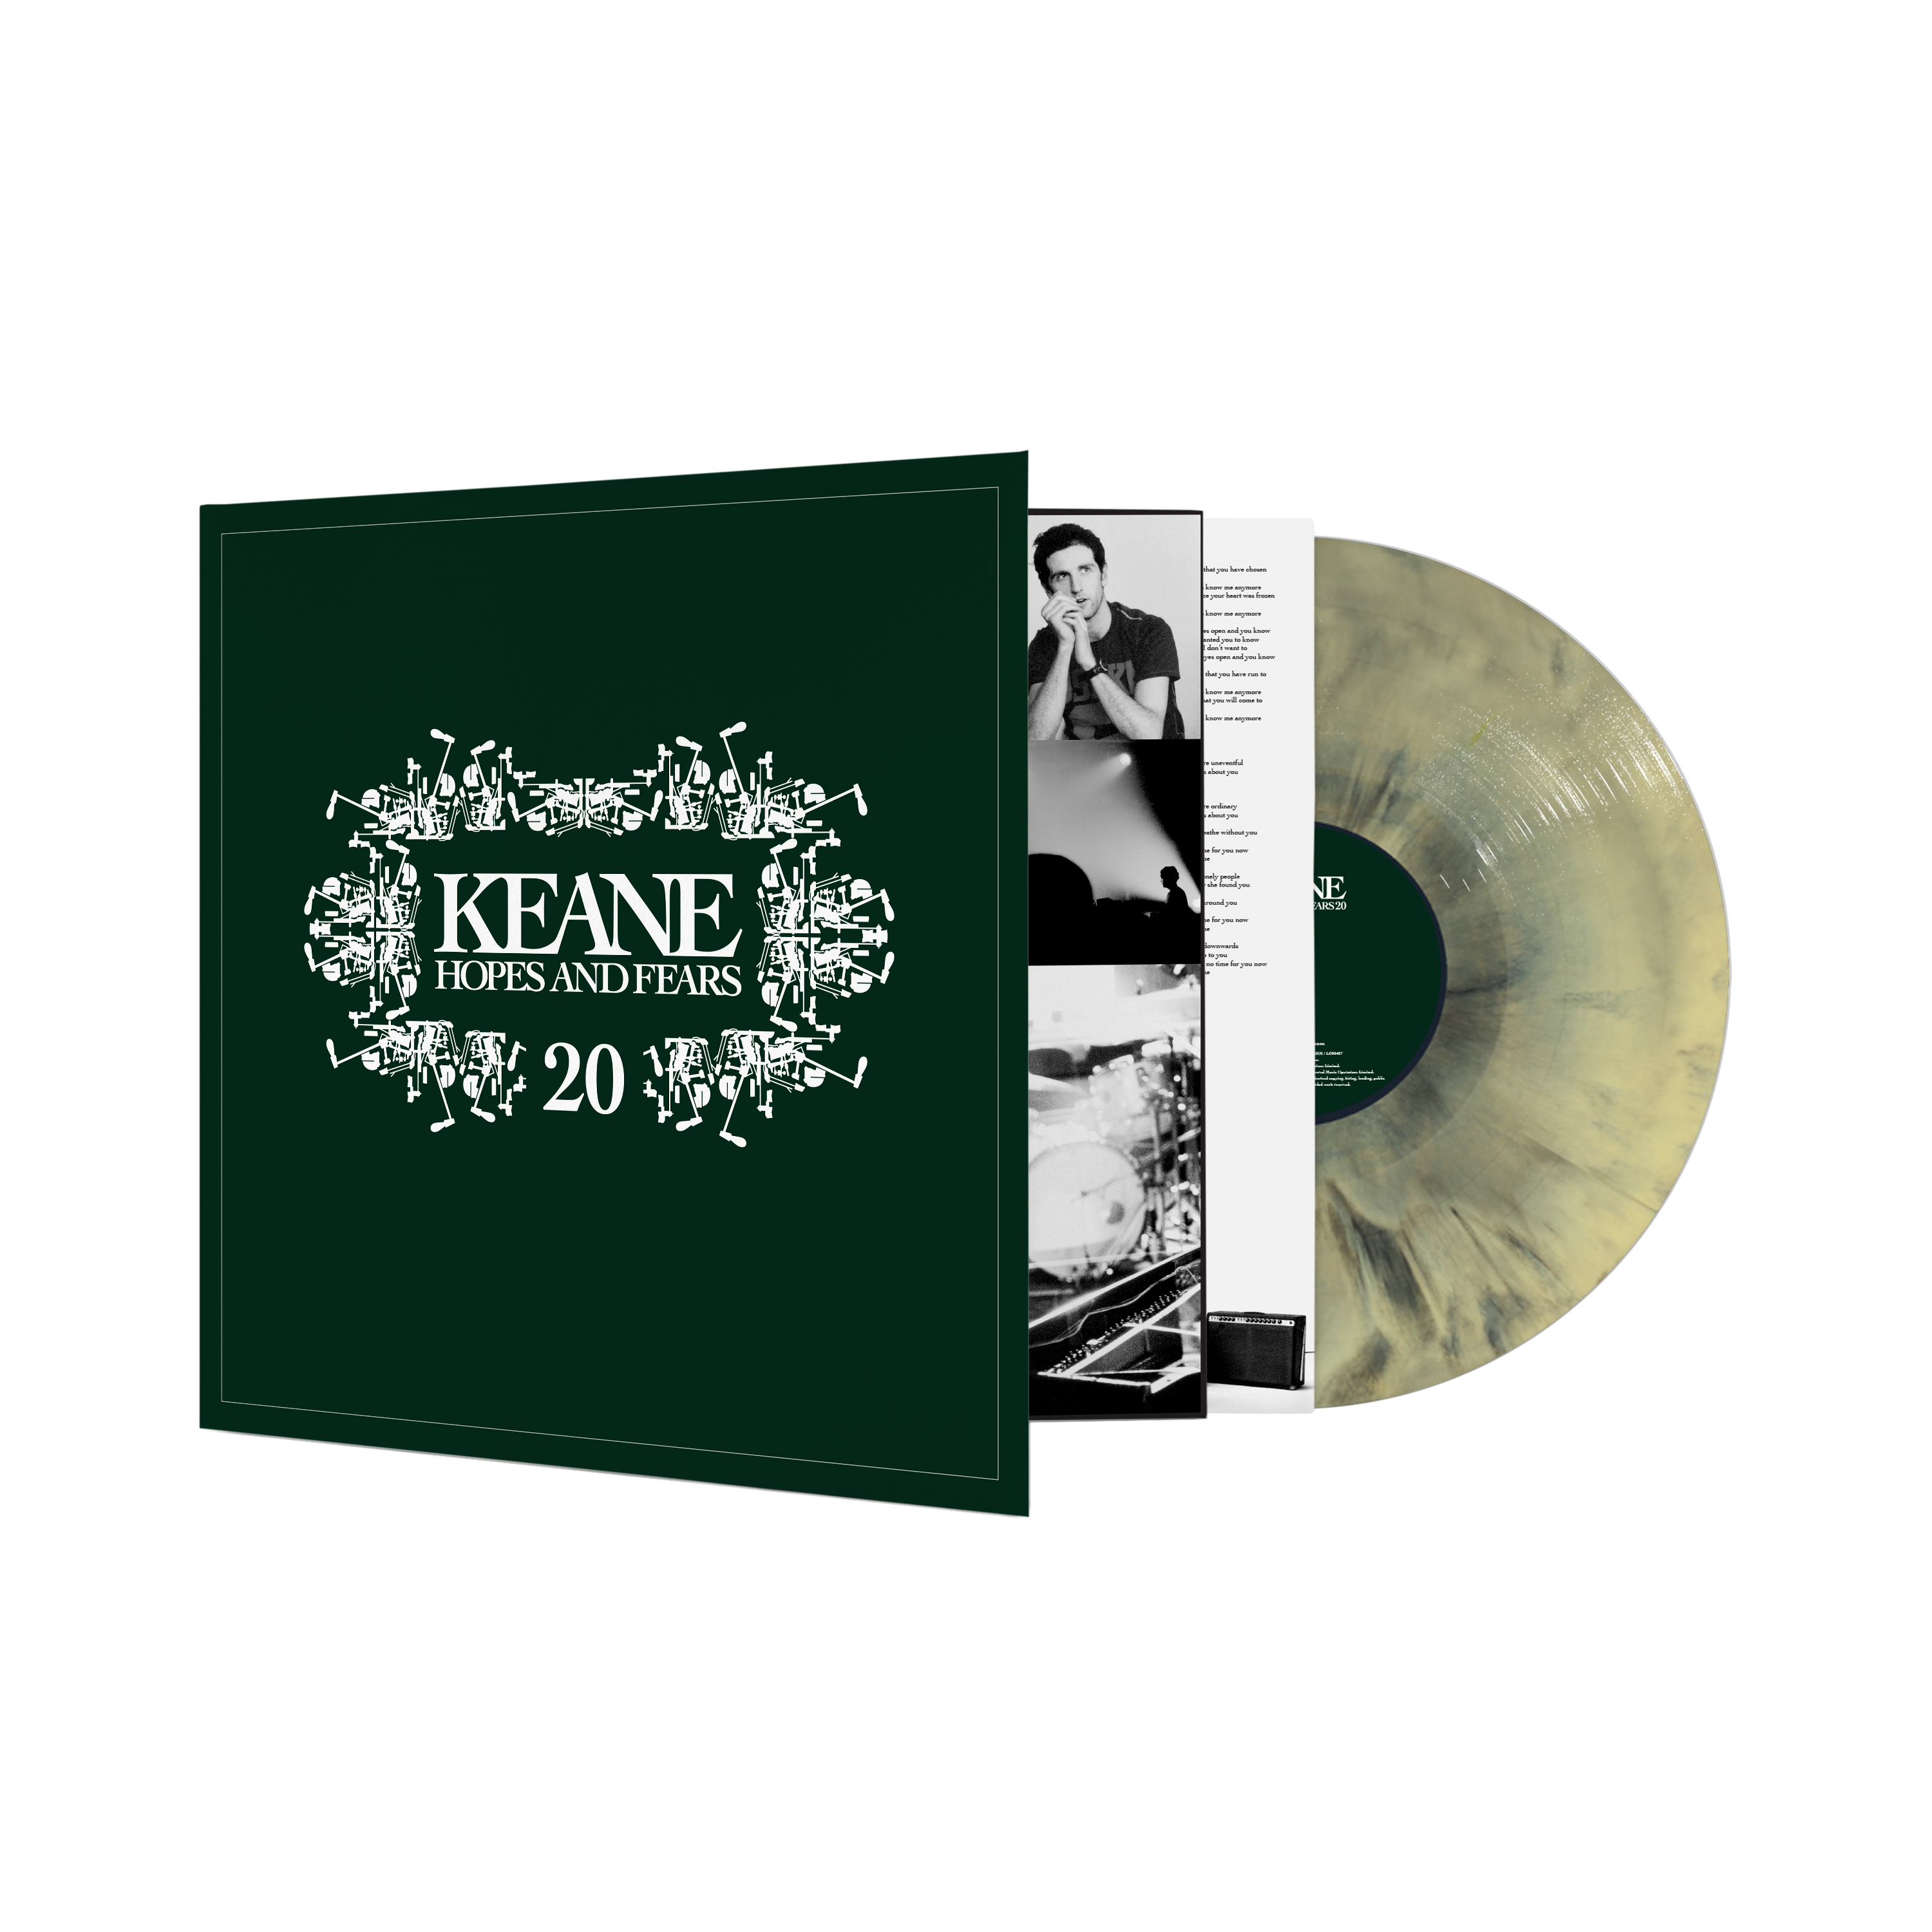 Keane - 20th Anniversary Hopes and Fears Limited Galaxy Vinyl LP